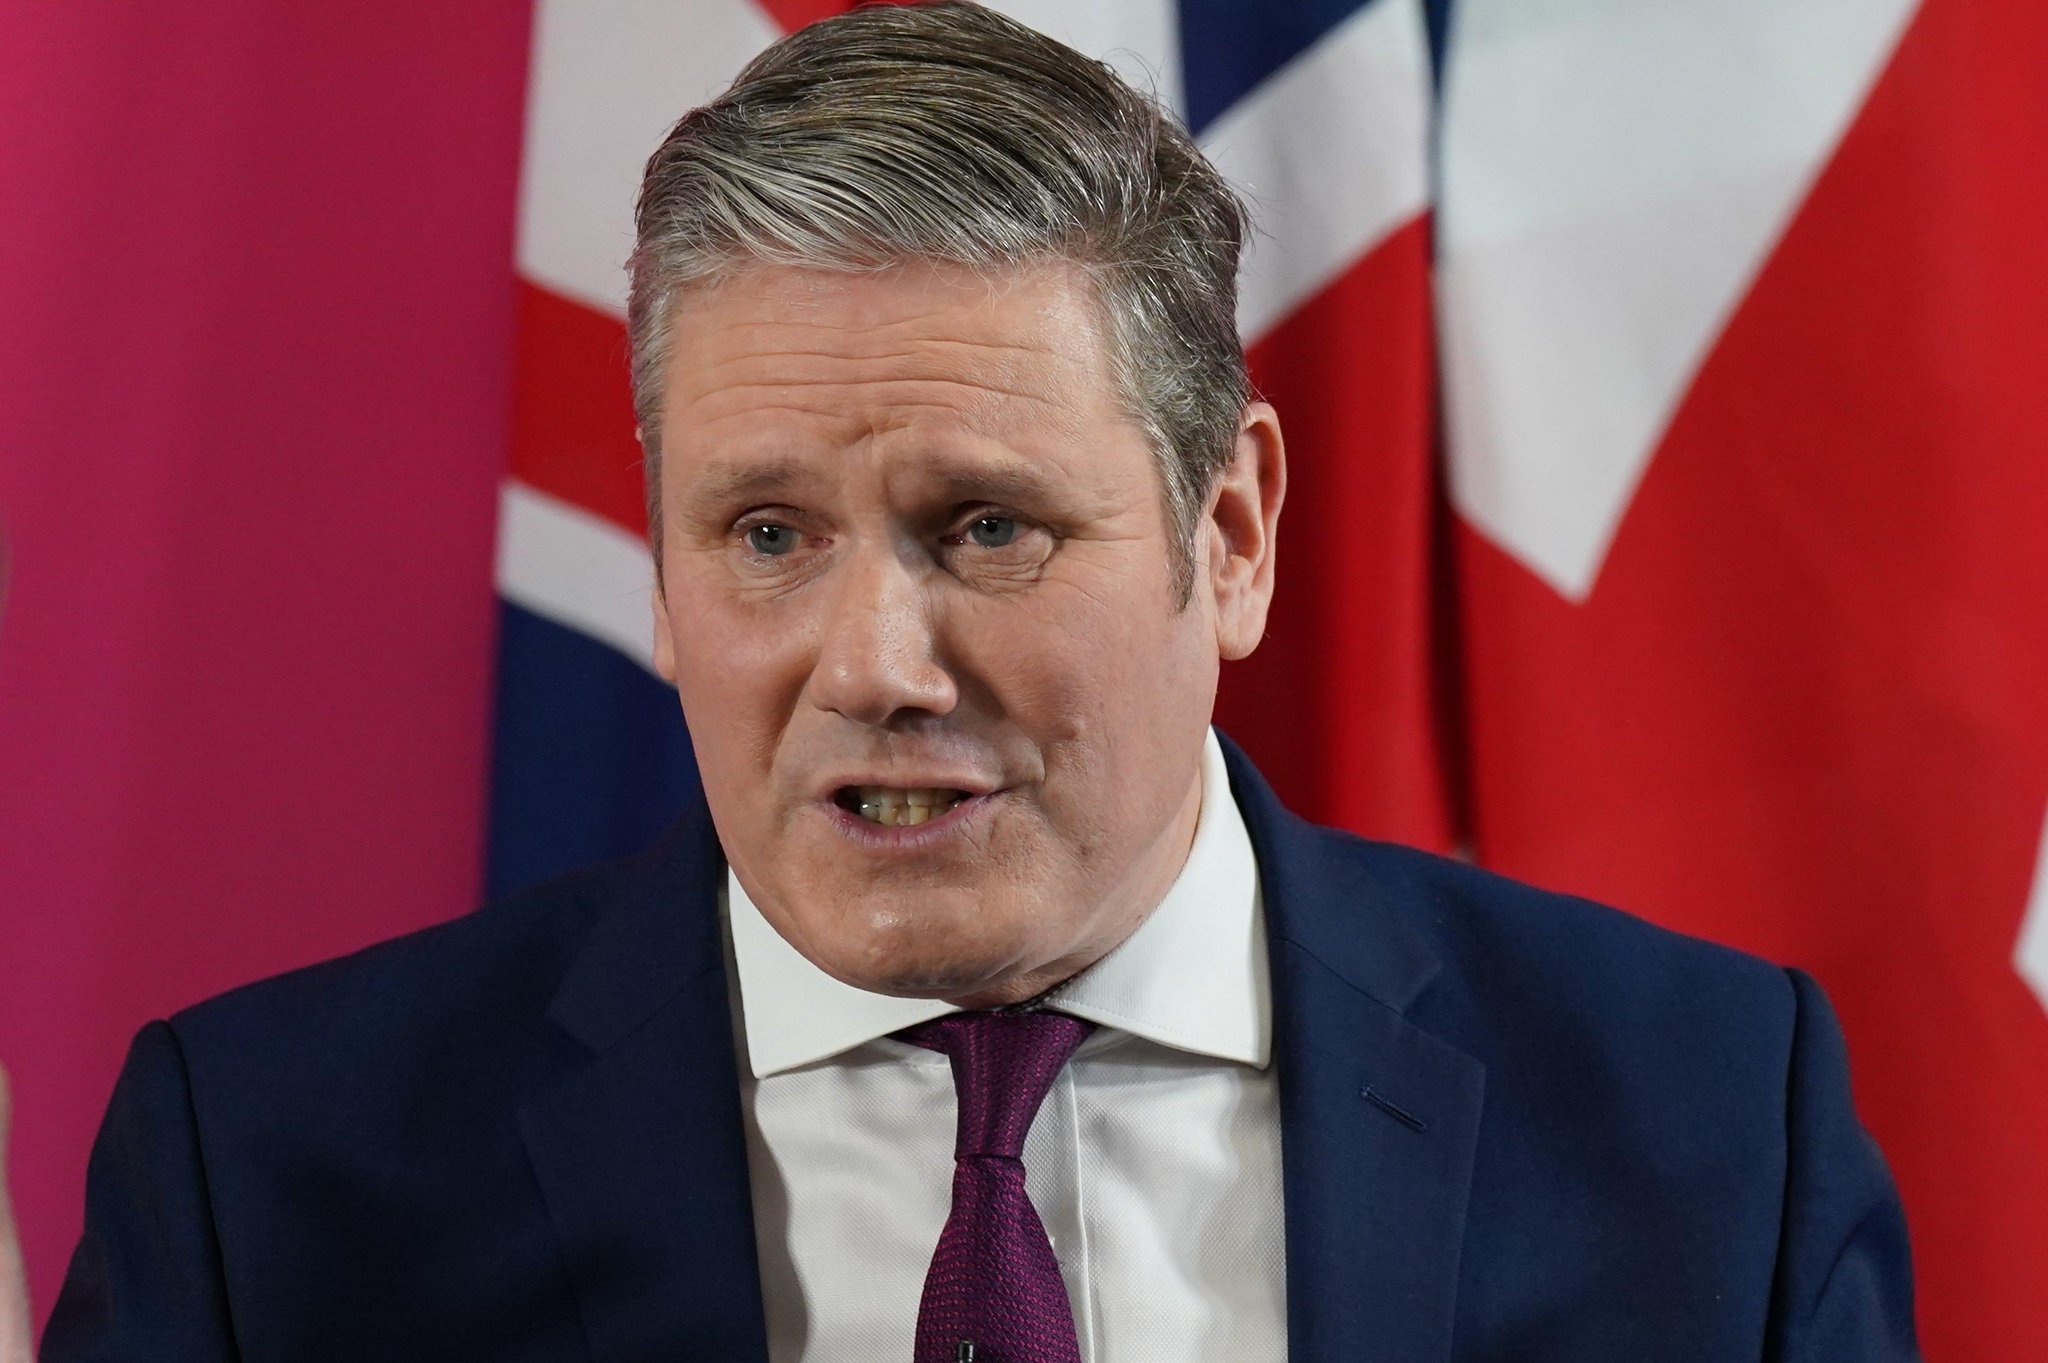 Starmer: Deception the cause of instability